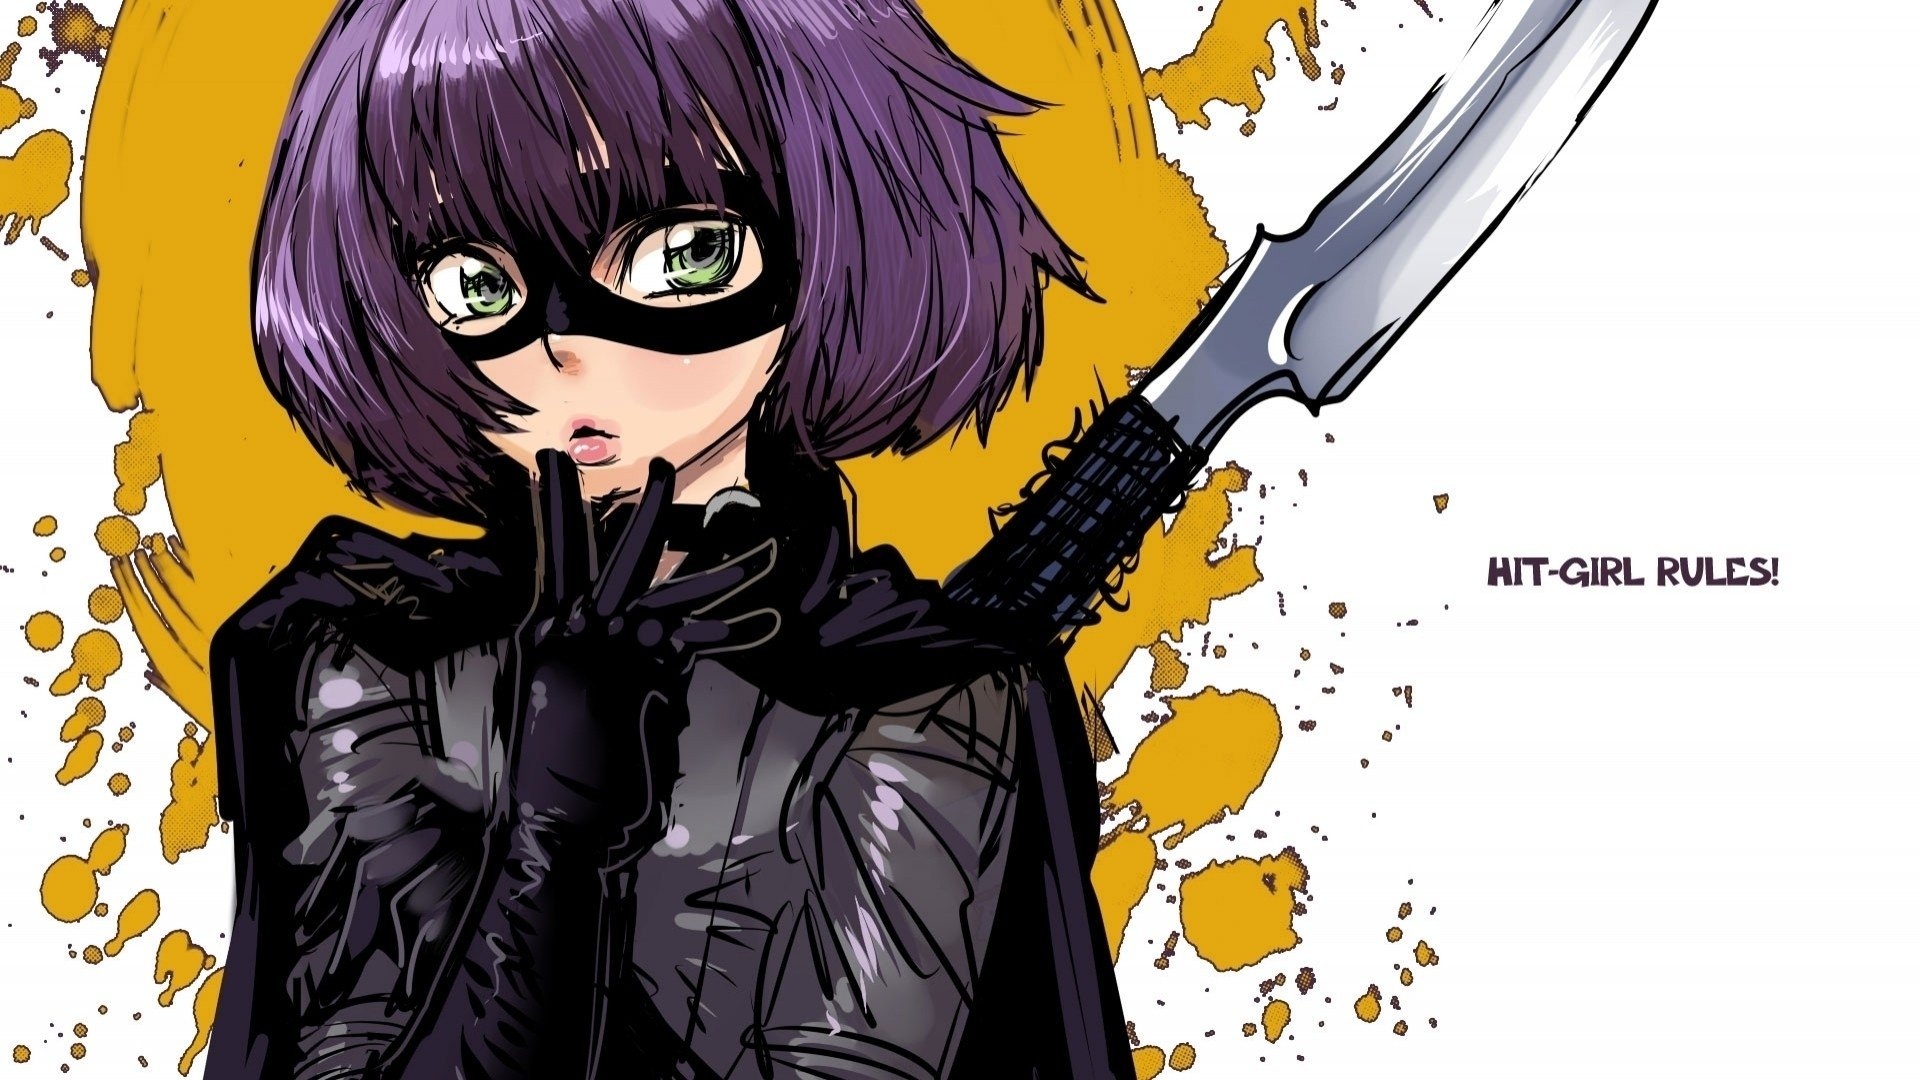 Hit-Girl movies, HD wallpapers, Background images, 1920x1080 Full HD Desktop